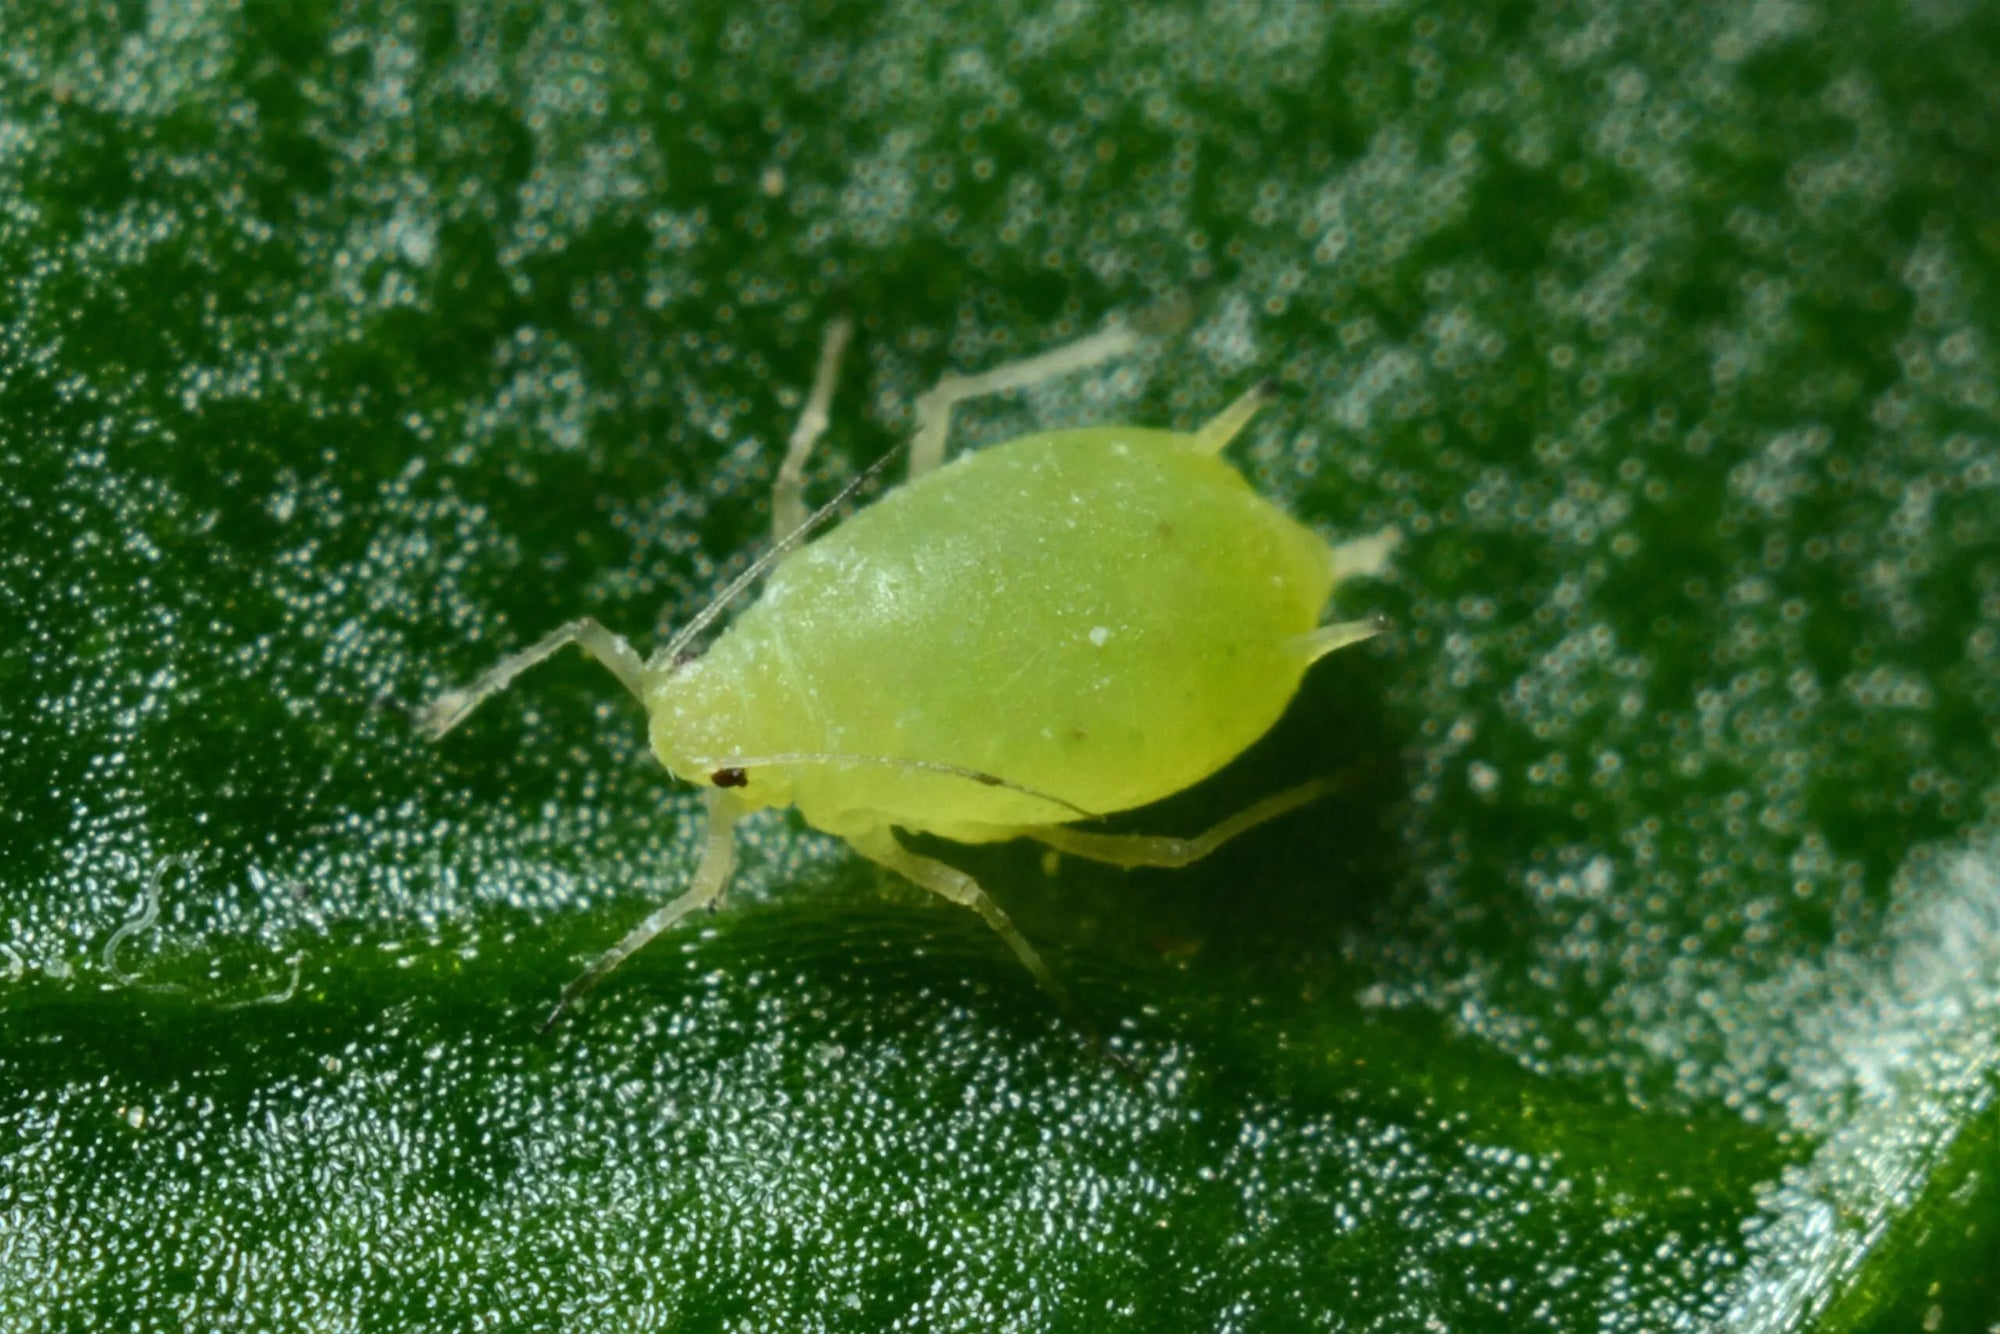 Common Garden Pests And How to Get Rid of Them - GreenStalk Garden